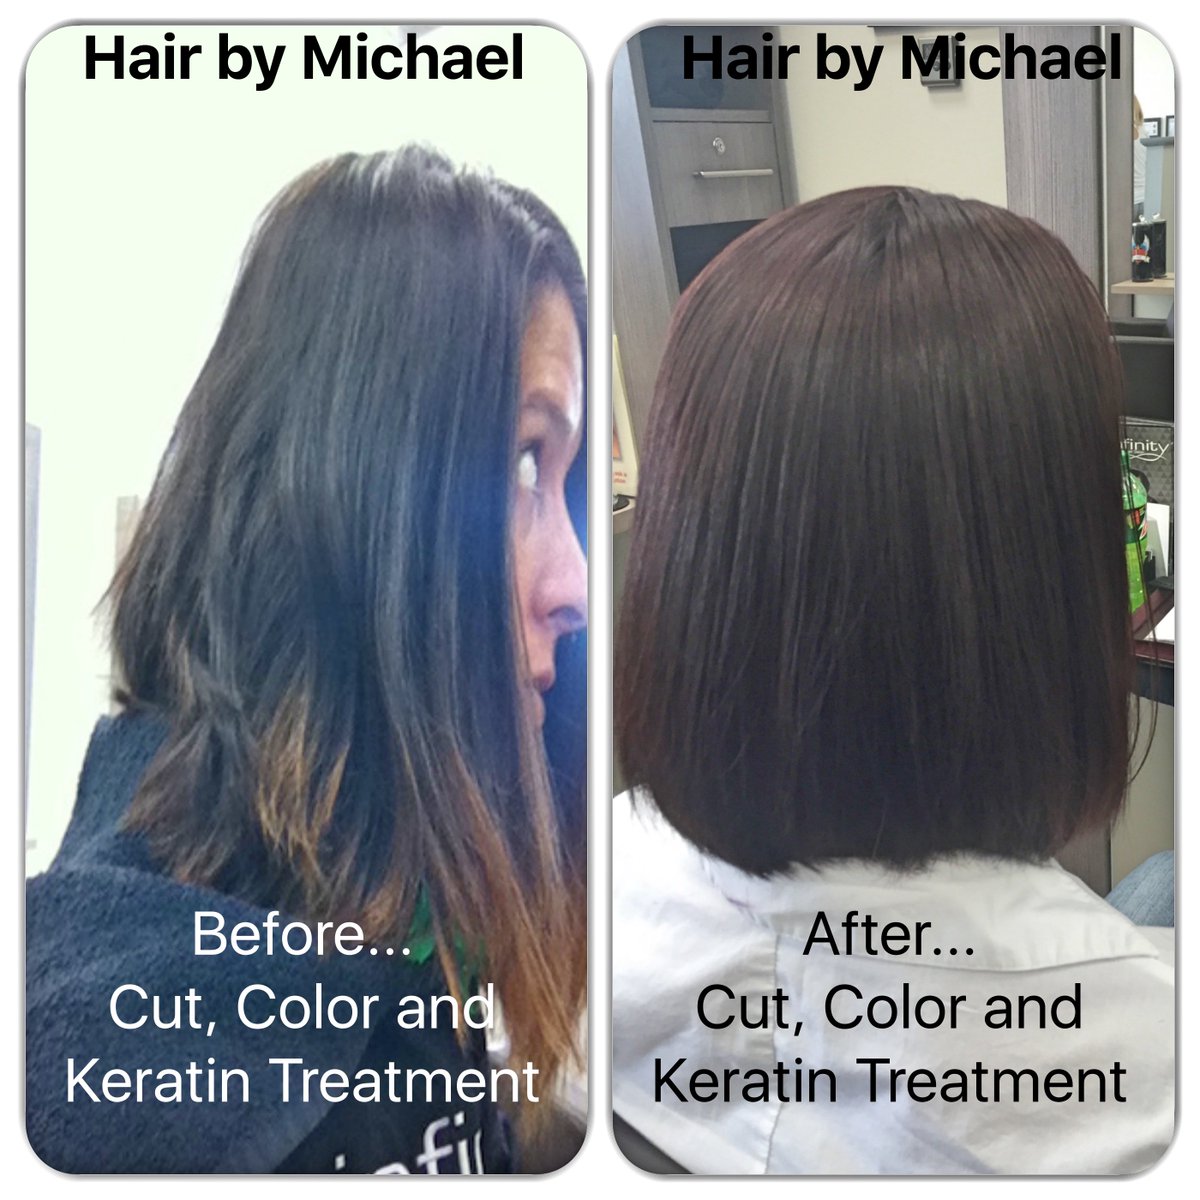 Infinity Hair Salon On Twitter Hair By Michael Cut Color And